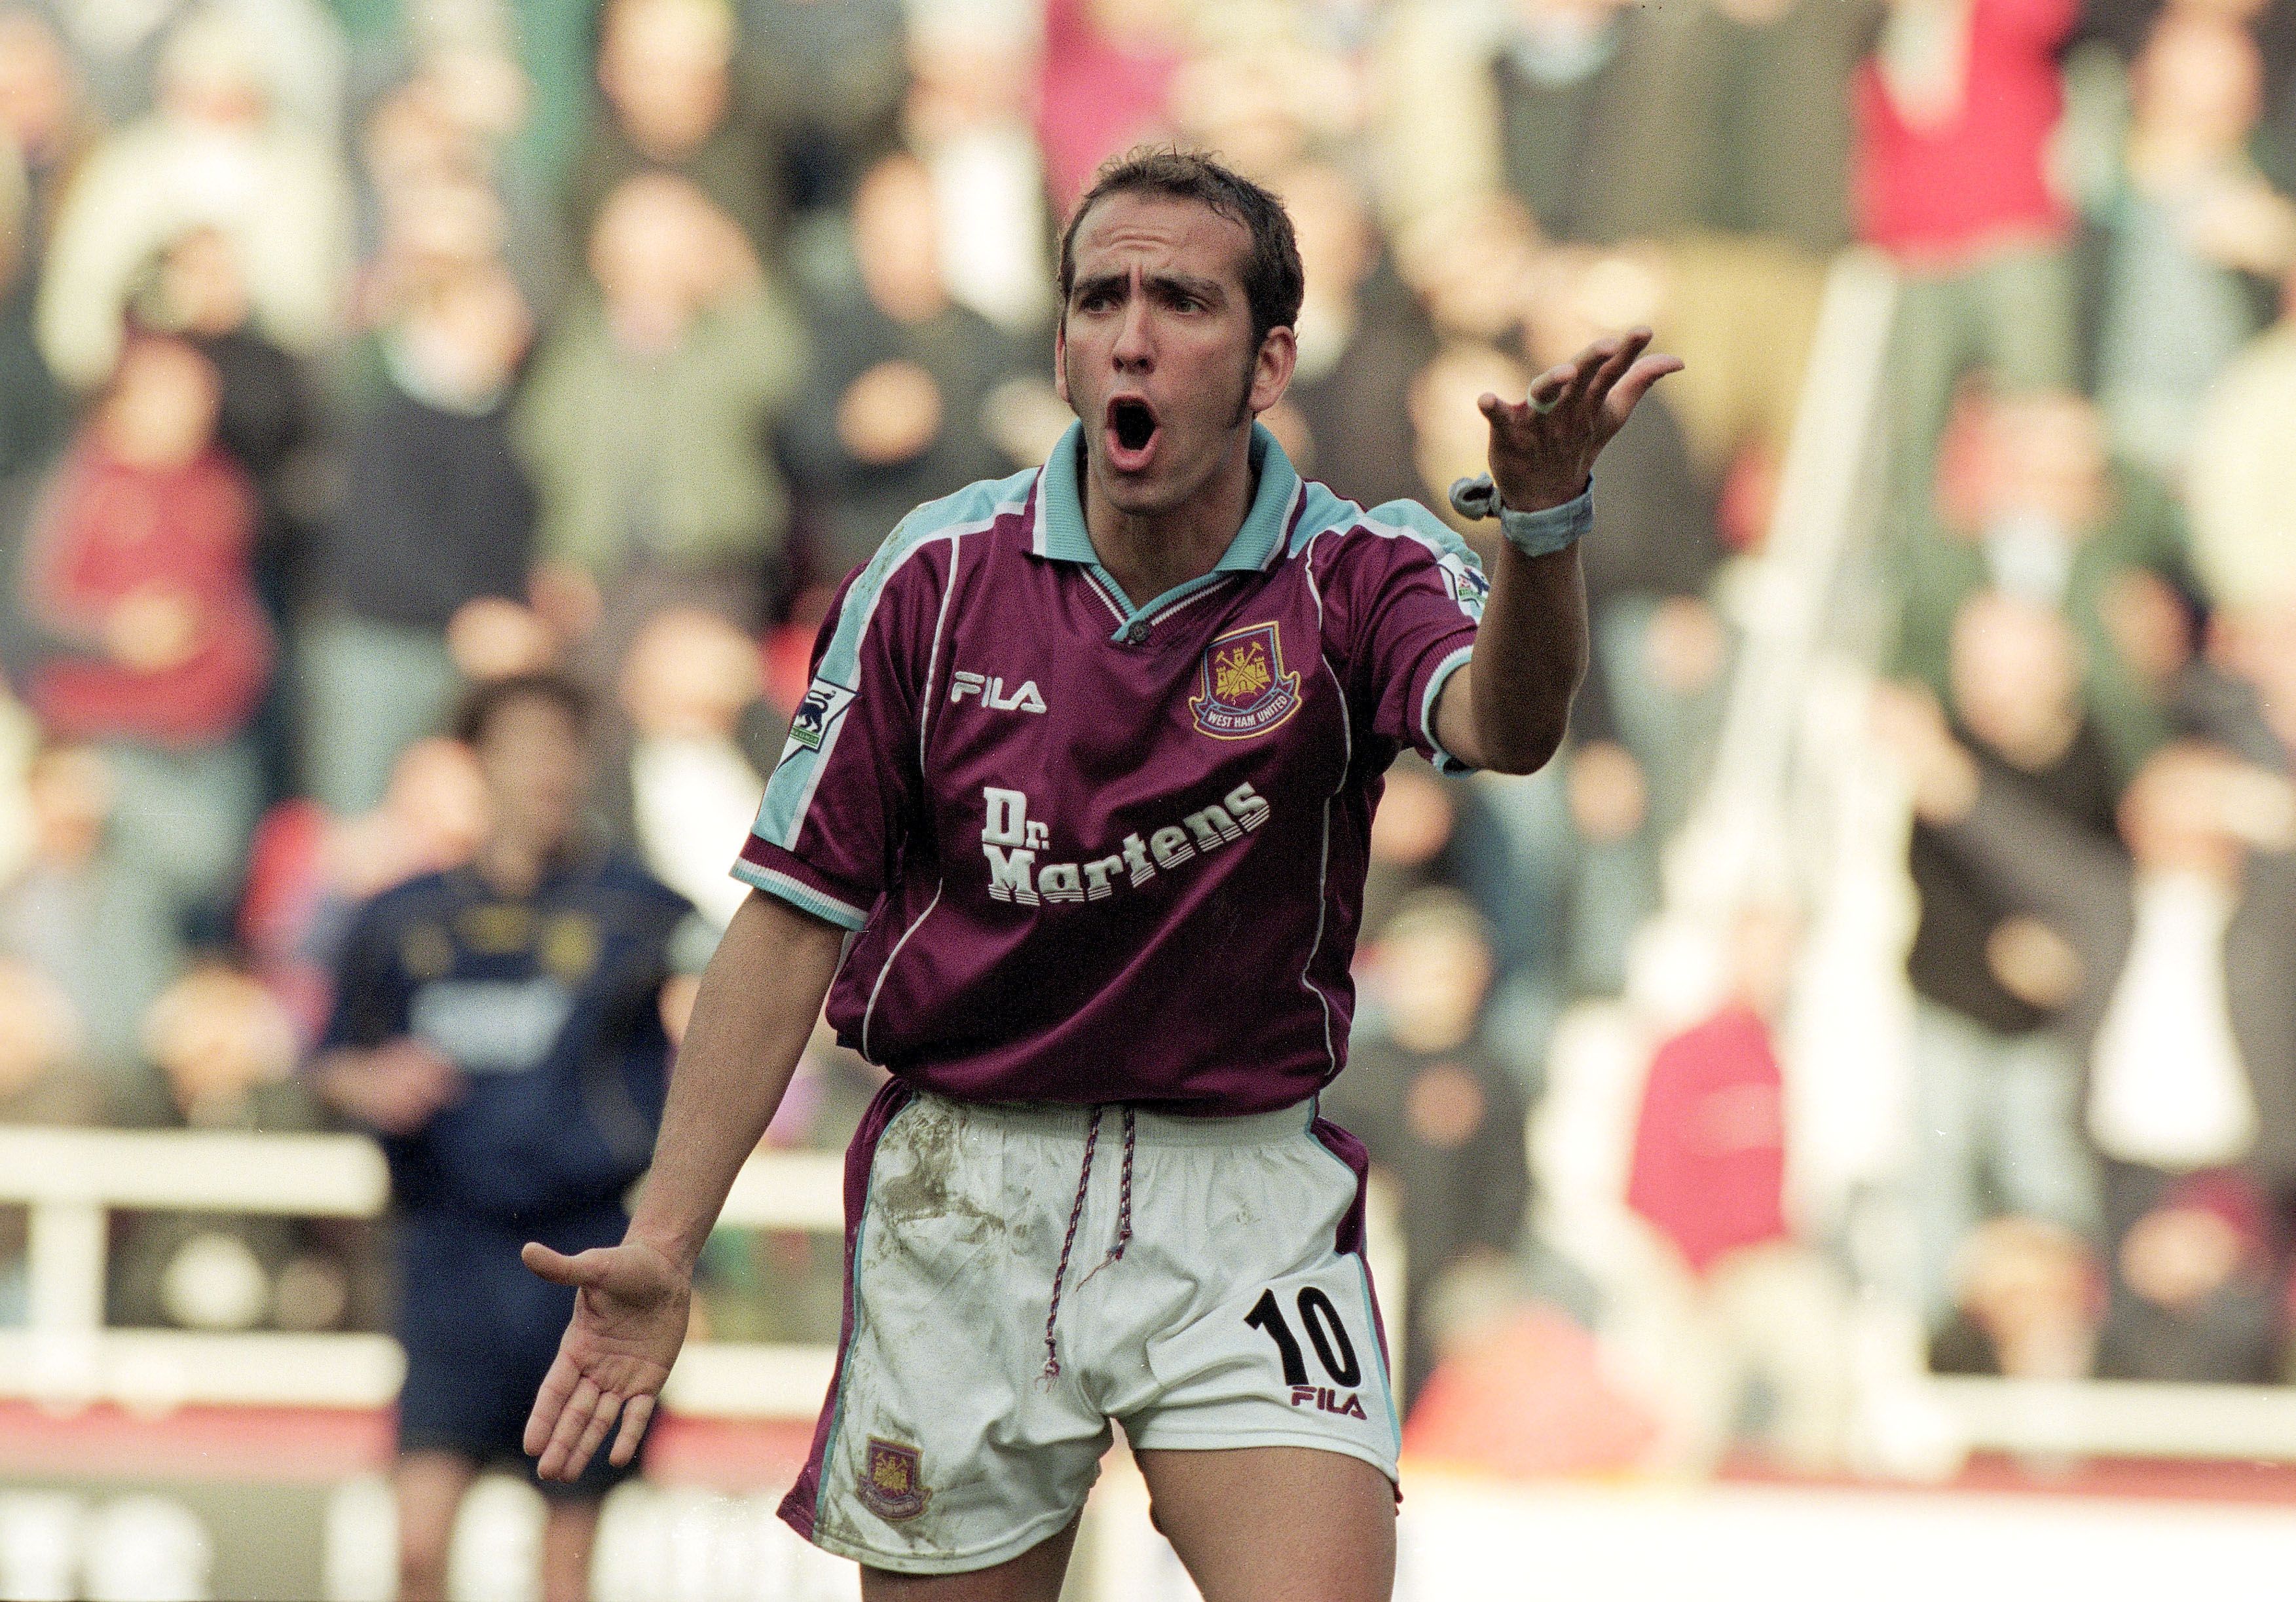 Paolo Di Canio in action for West Ham